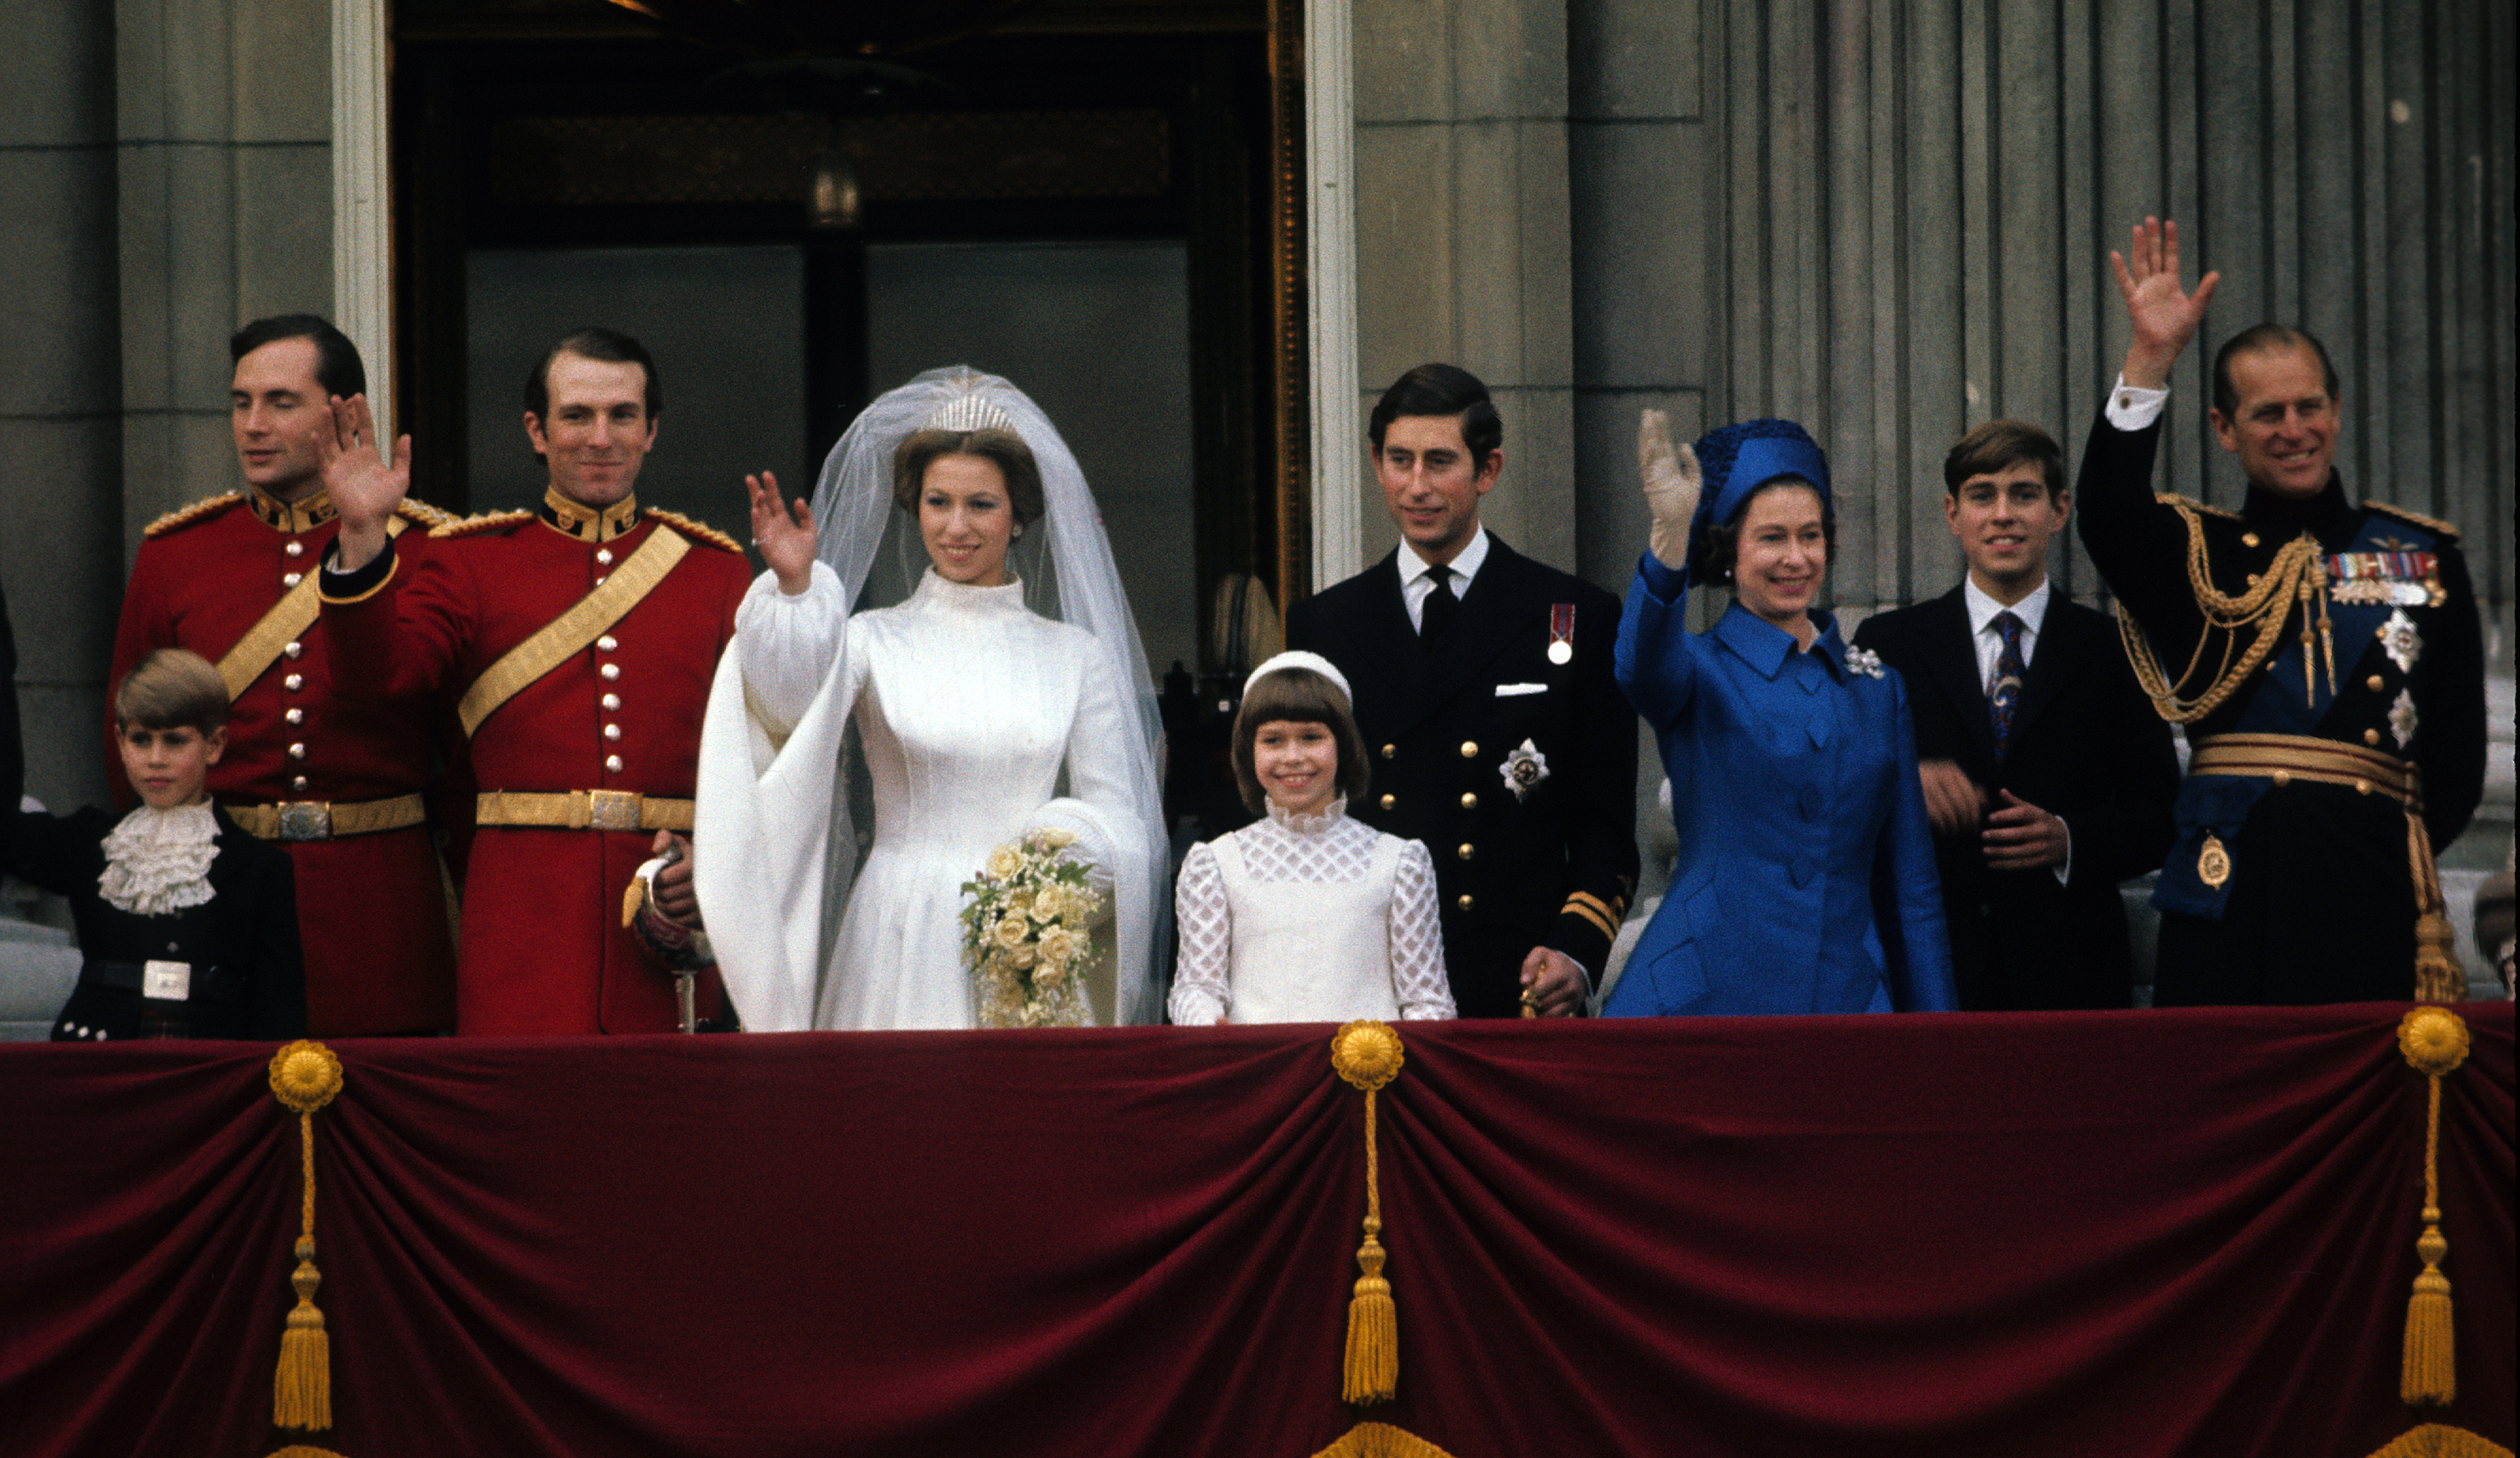 <p>Princess Anne and new husband Captain Mark Phillips were joined on the balcony at Buckingham Palace in London by family members including the bride's mother, Queen Elizabeth II, father Prince Philip, brothers Prince Charles, Prince Andrew and Prince Edward and cousin Lady Sarah Armstrong-Jones following Anne's wedding on Nov. 14, 1973.</p>